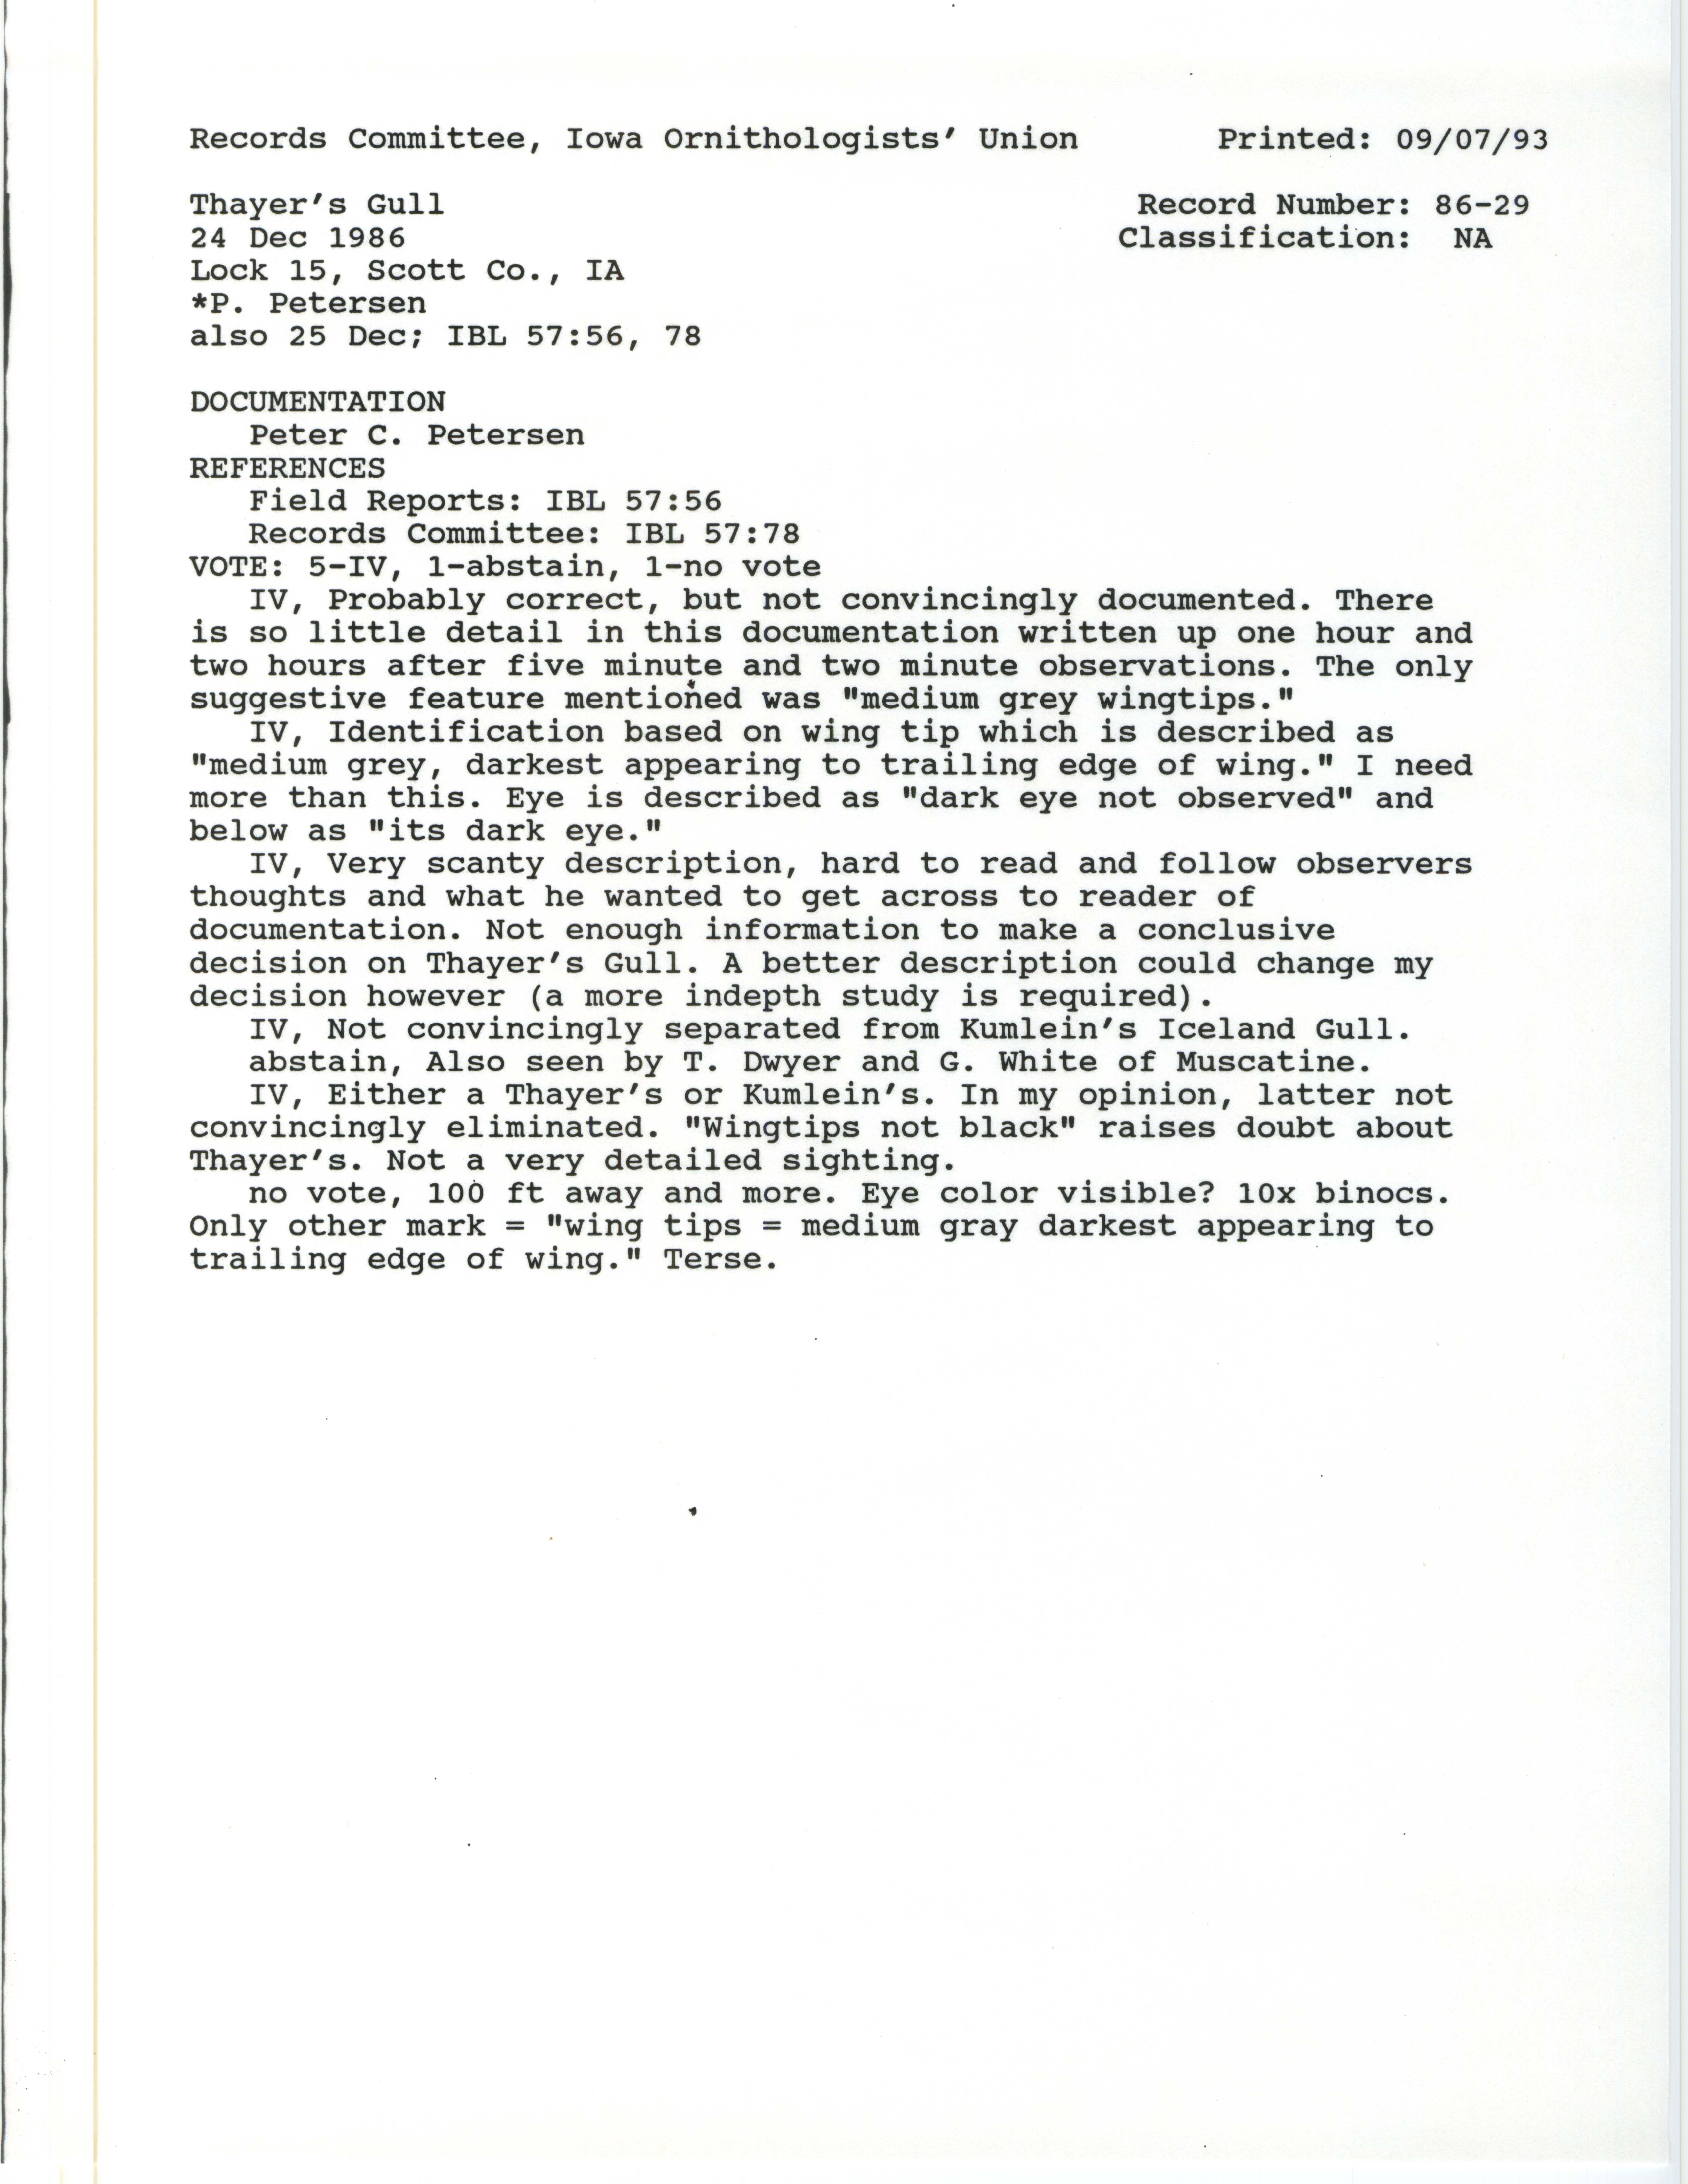 Records Committee review for rare bird sighting of Thayer's Gull at Lock 15 in Davenport, 1986